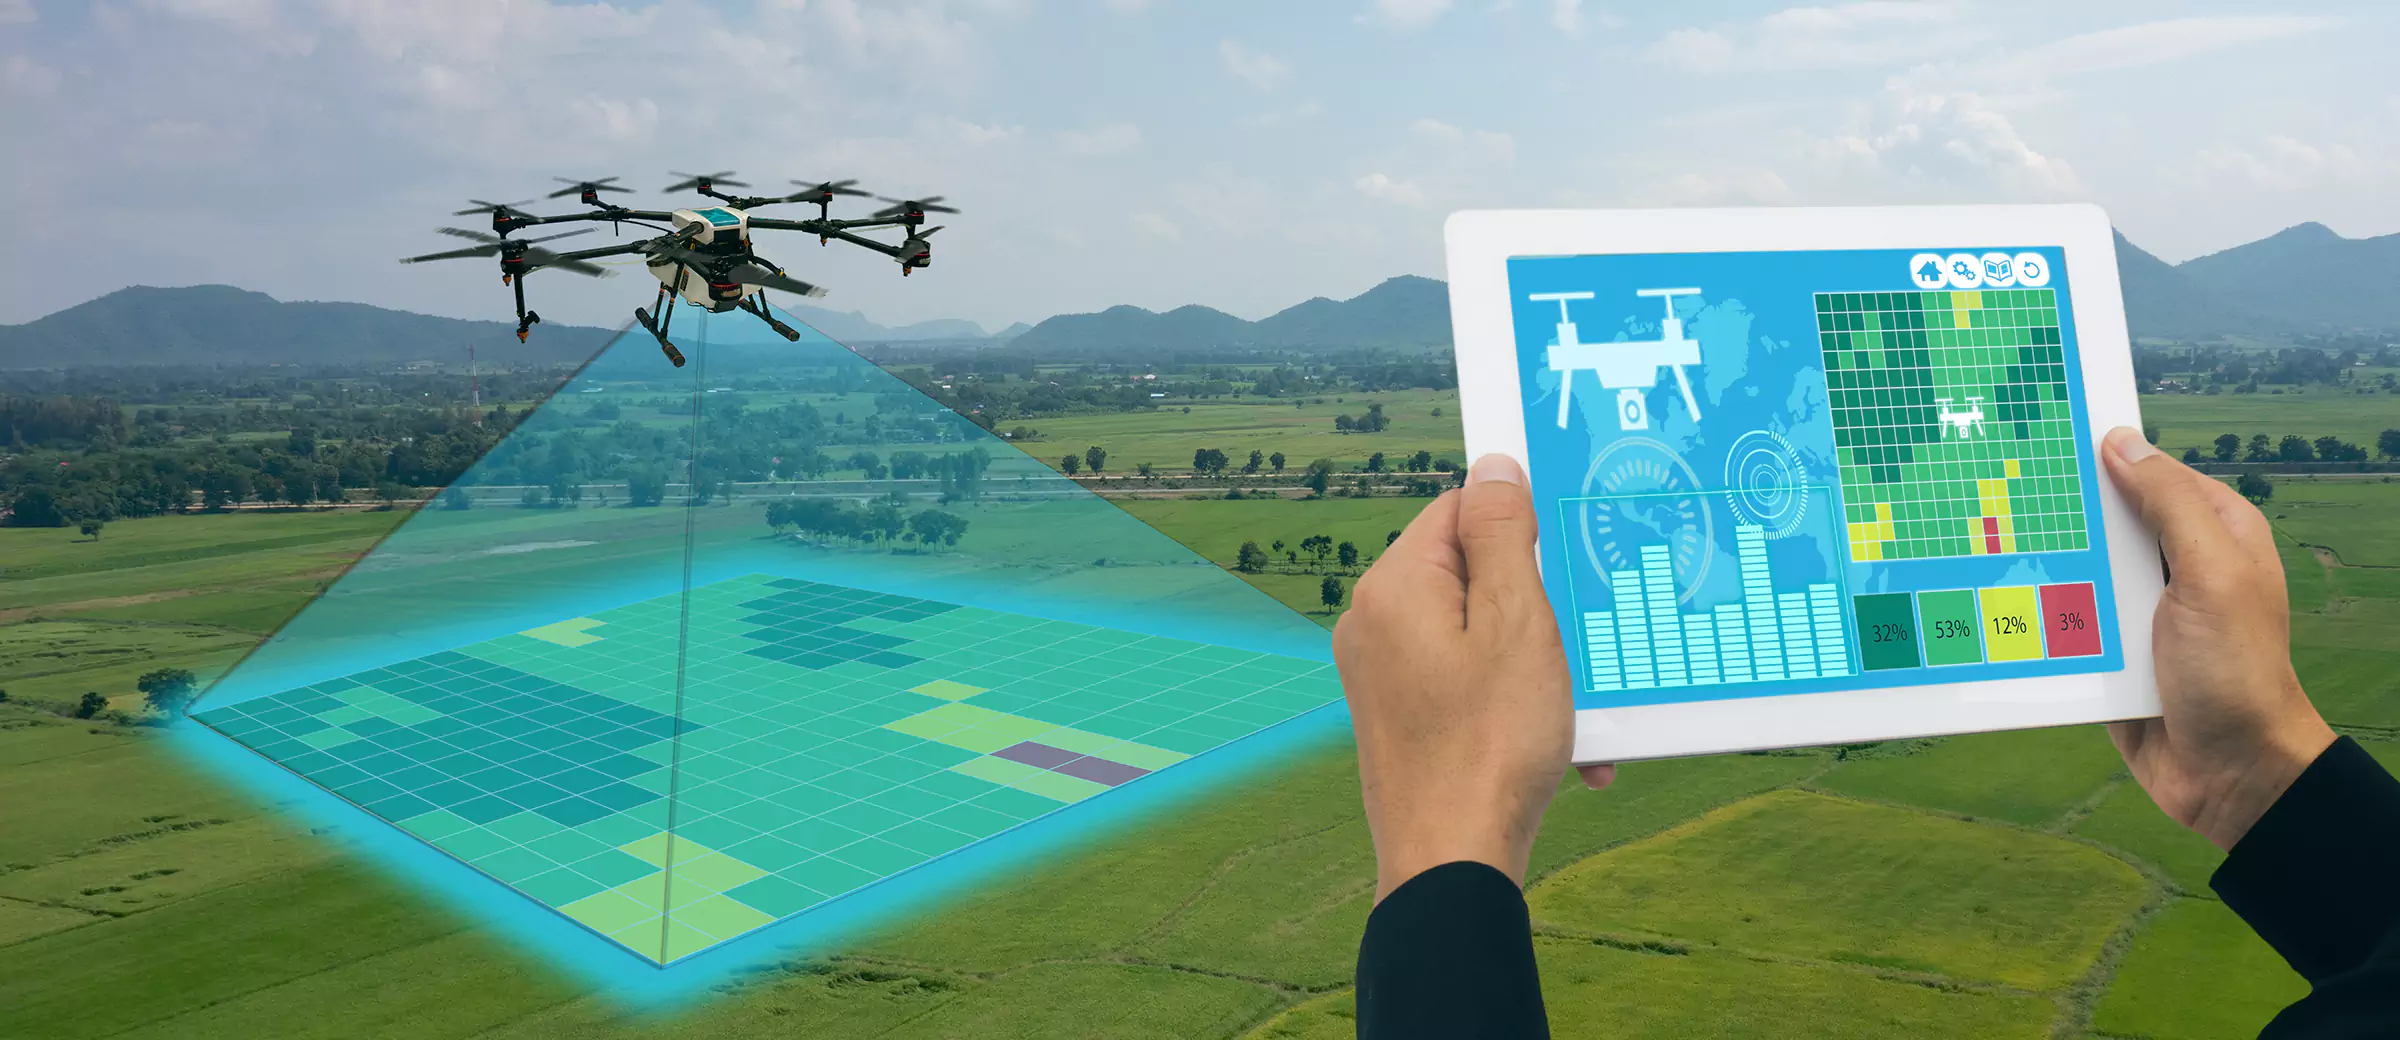 Engineer holding a tablet controlling drone technology on farm land